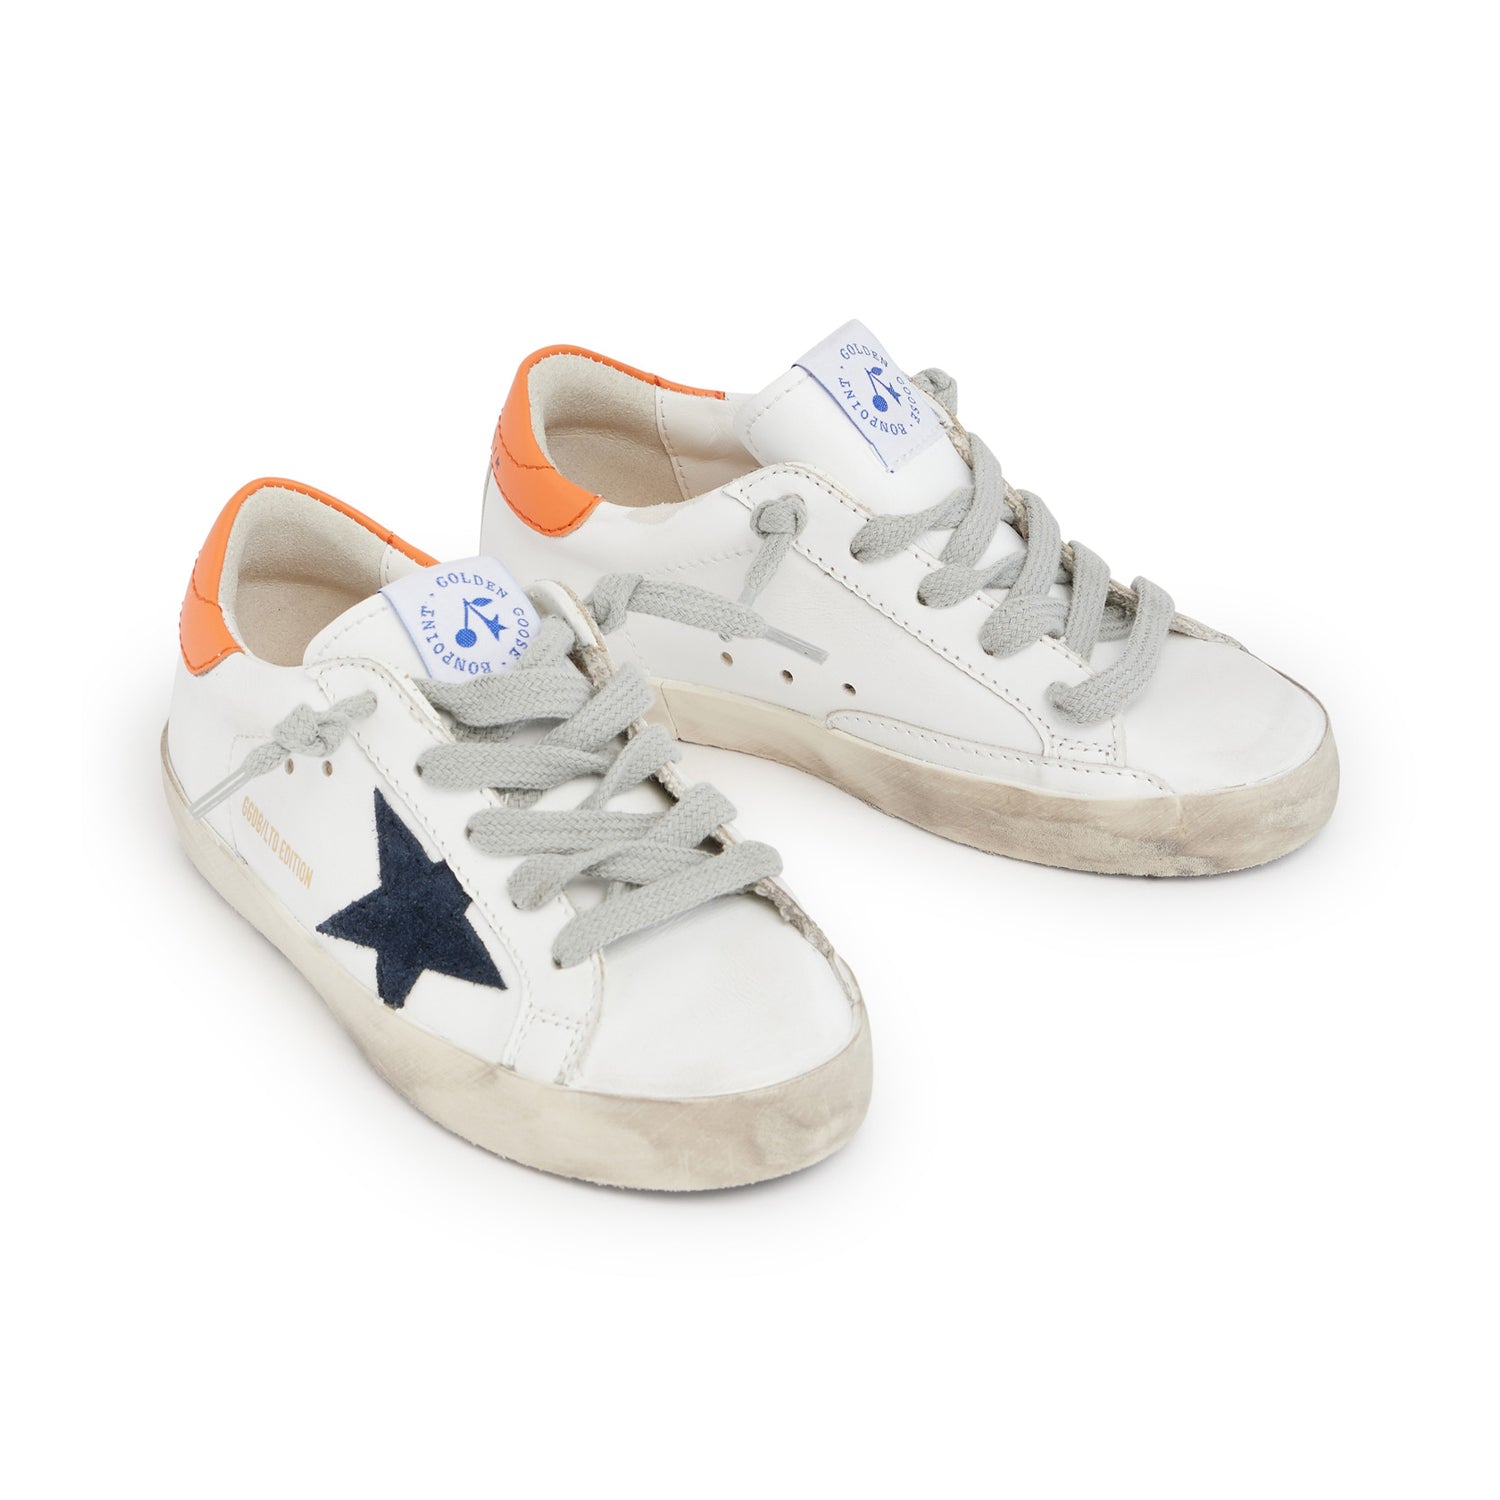 Bonpoint x Golden Goose Leather Sneakers blue | child shoes